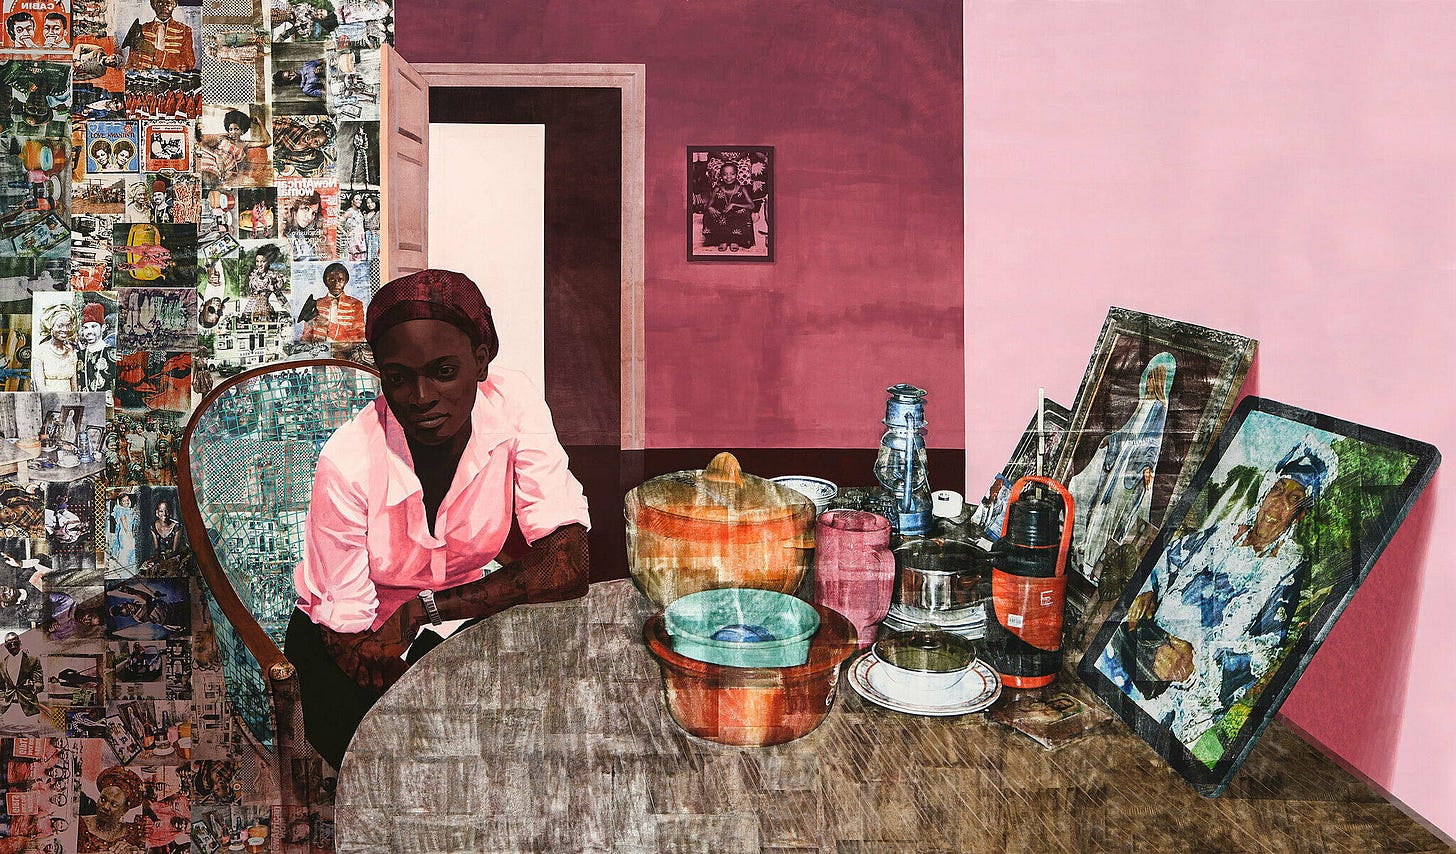 A collaged portrait by Njideka Crosby. A woman sits at a table with photographs behind her.